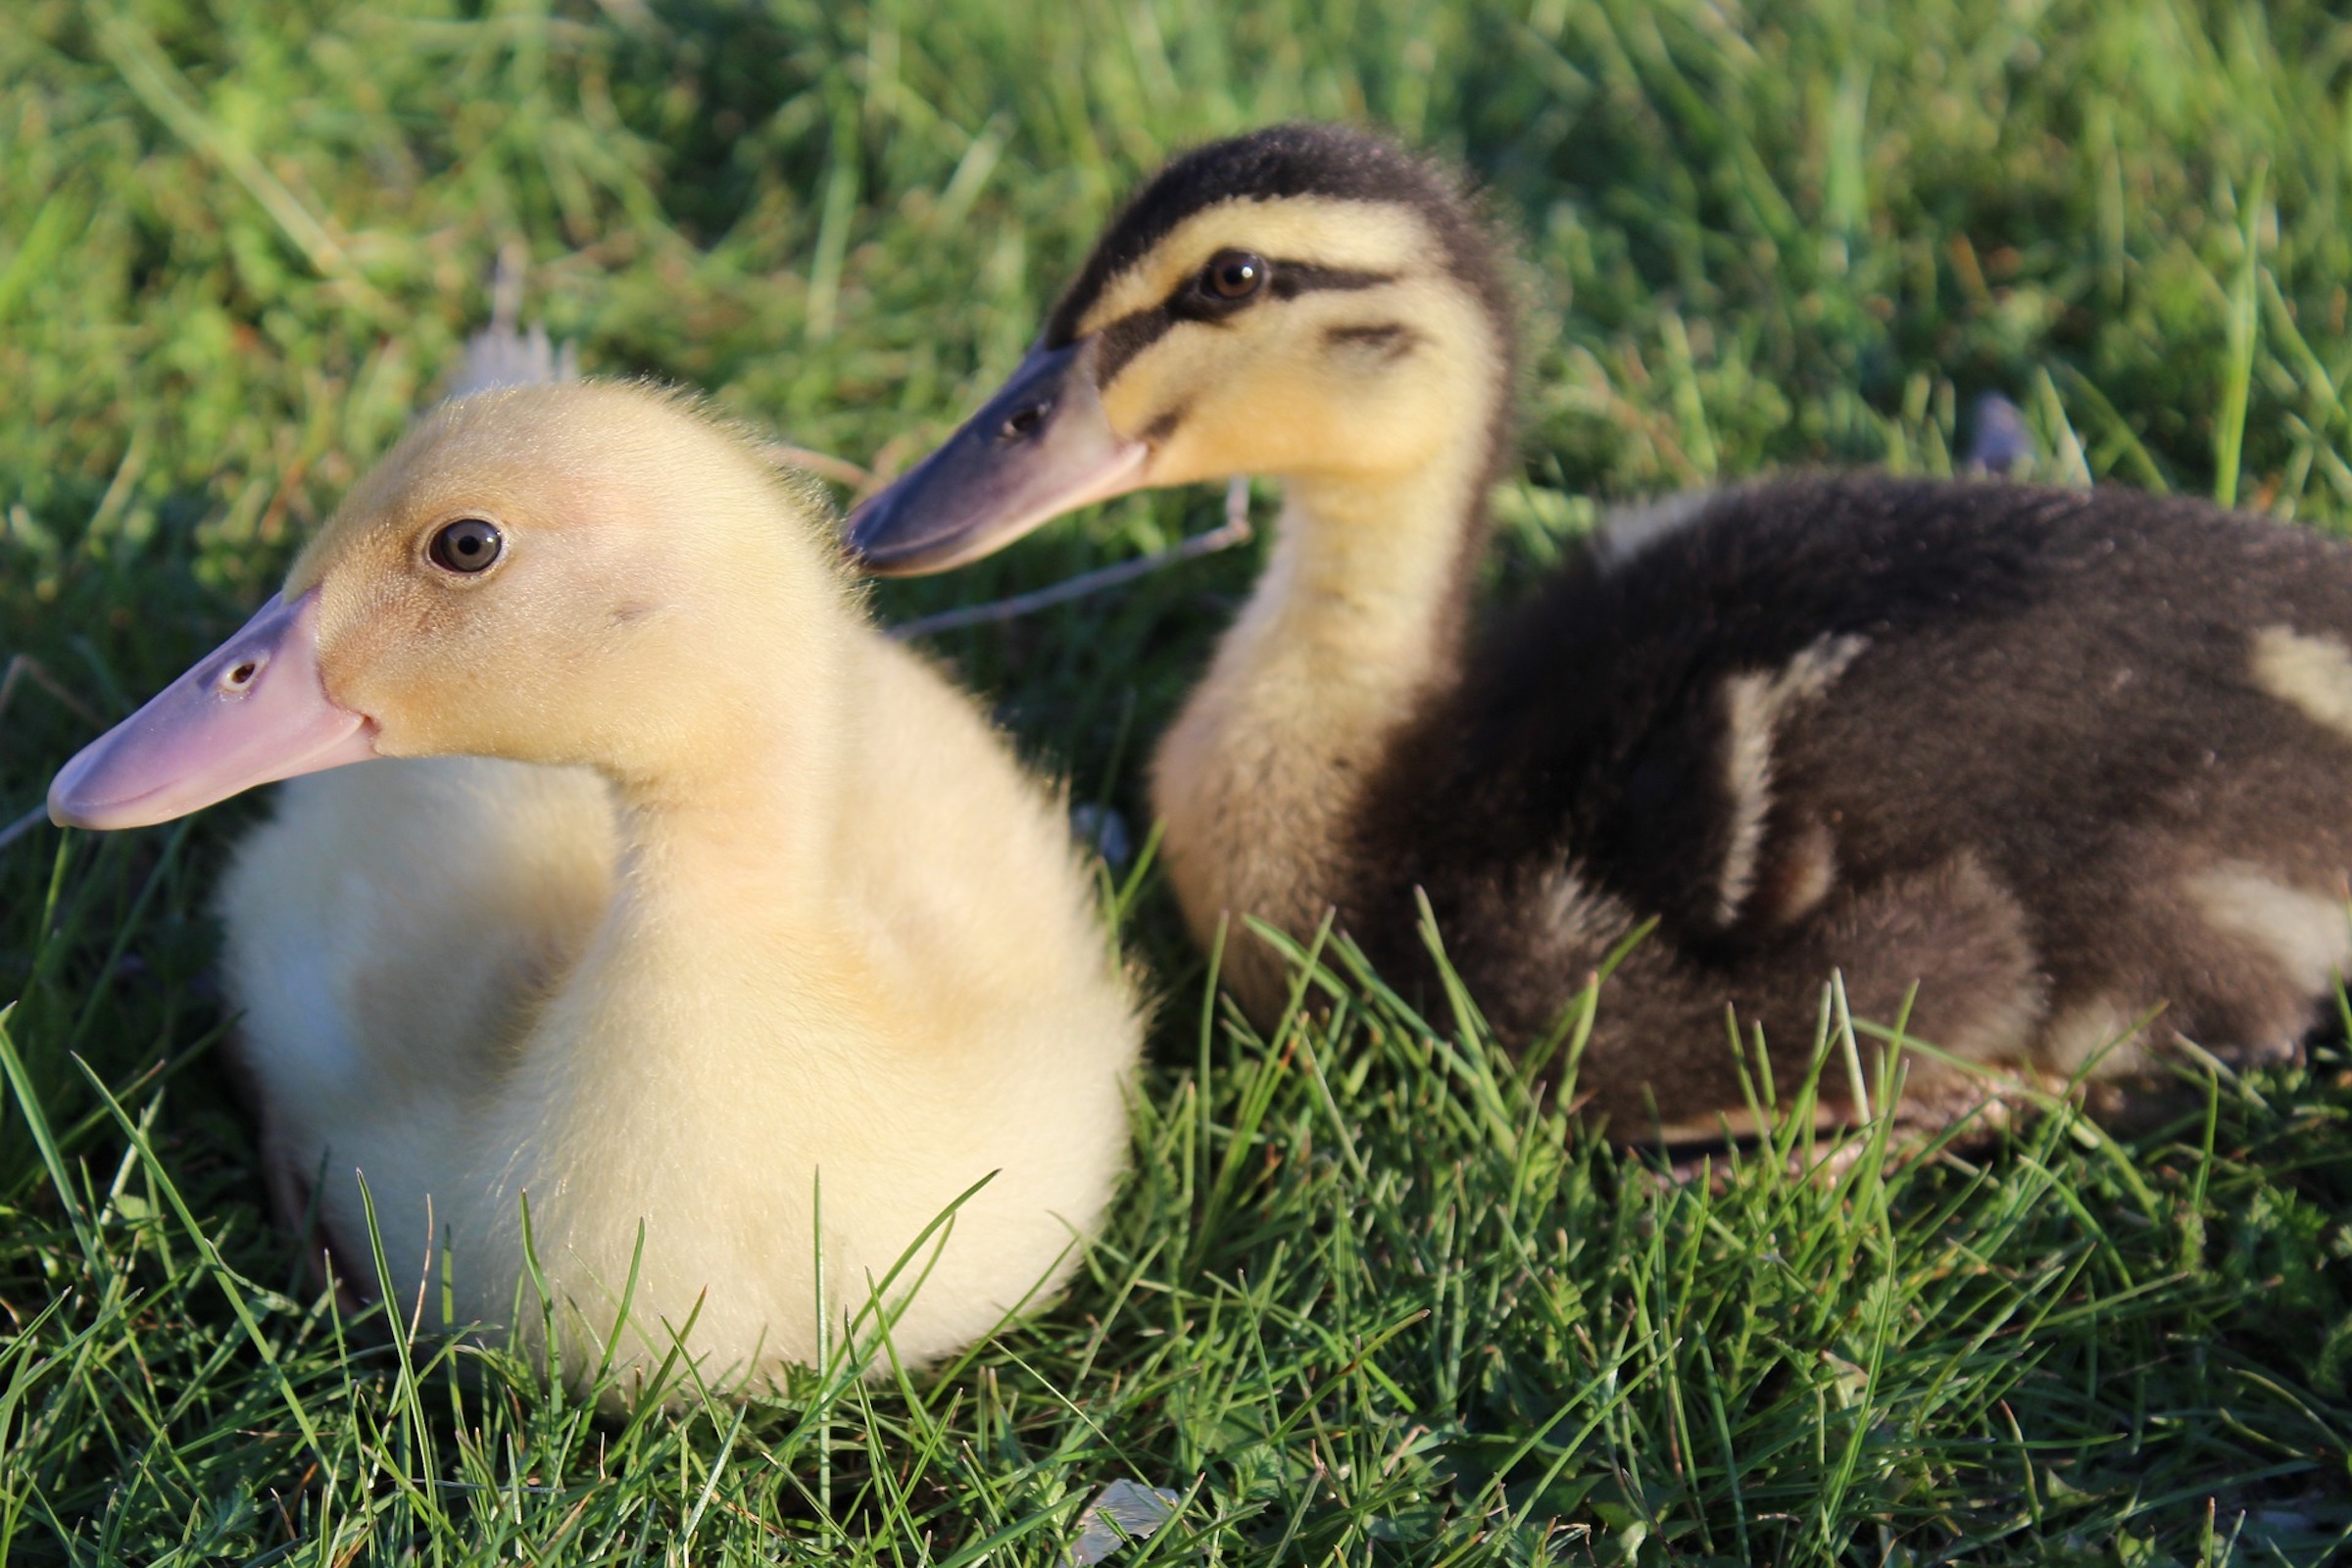 Two baby ducks sit in the grass